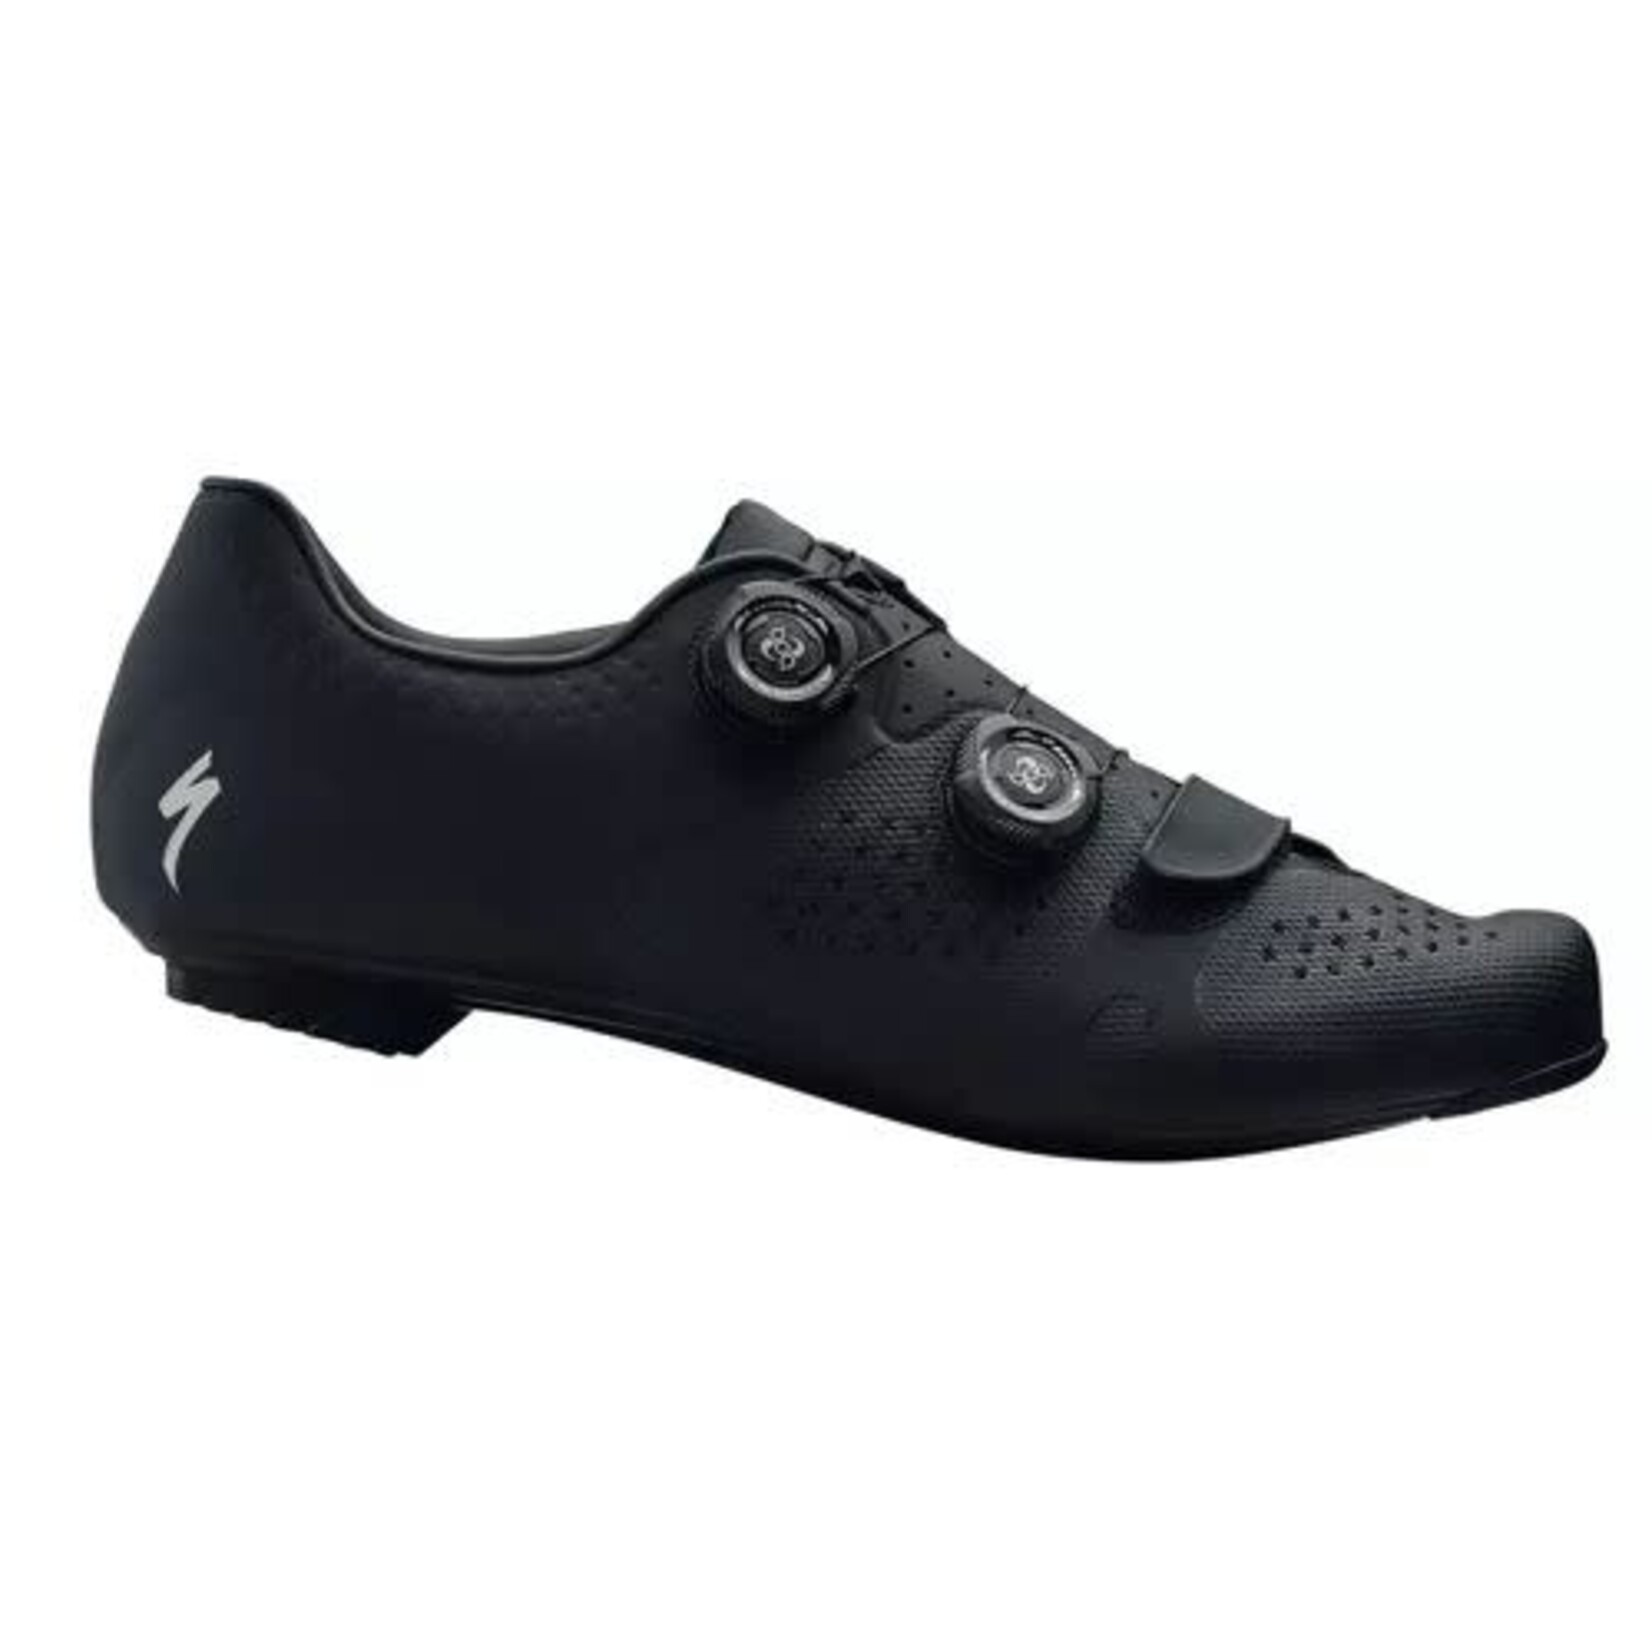 Specialized TORCH 3.0 RD SHOE BLK 37